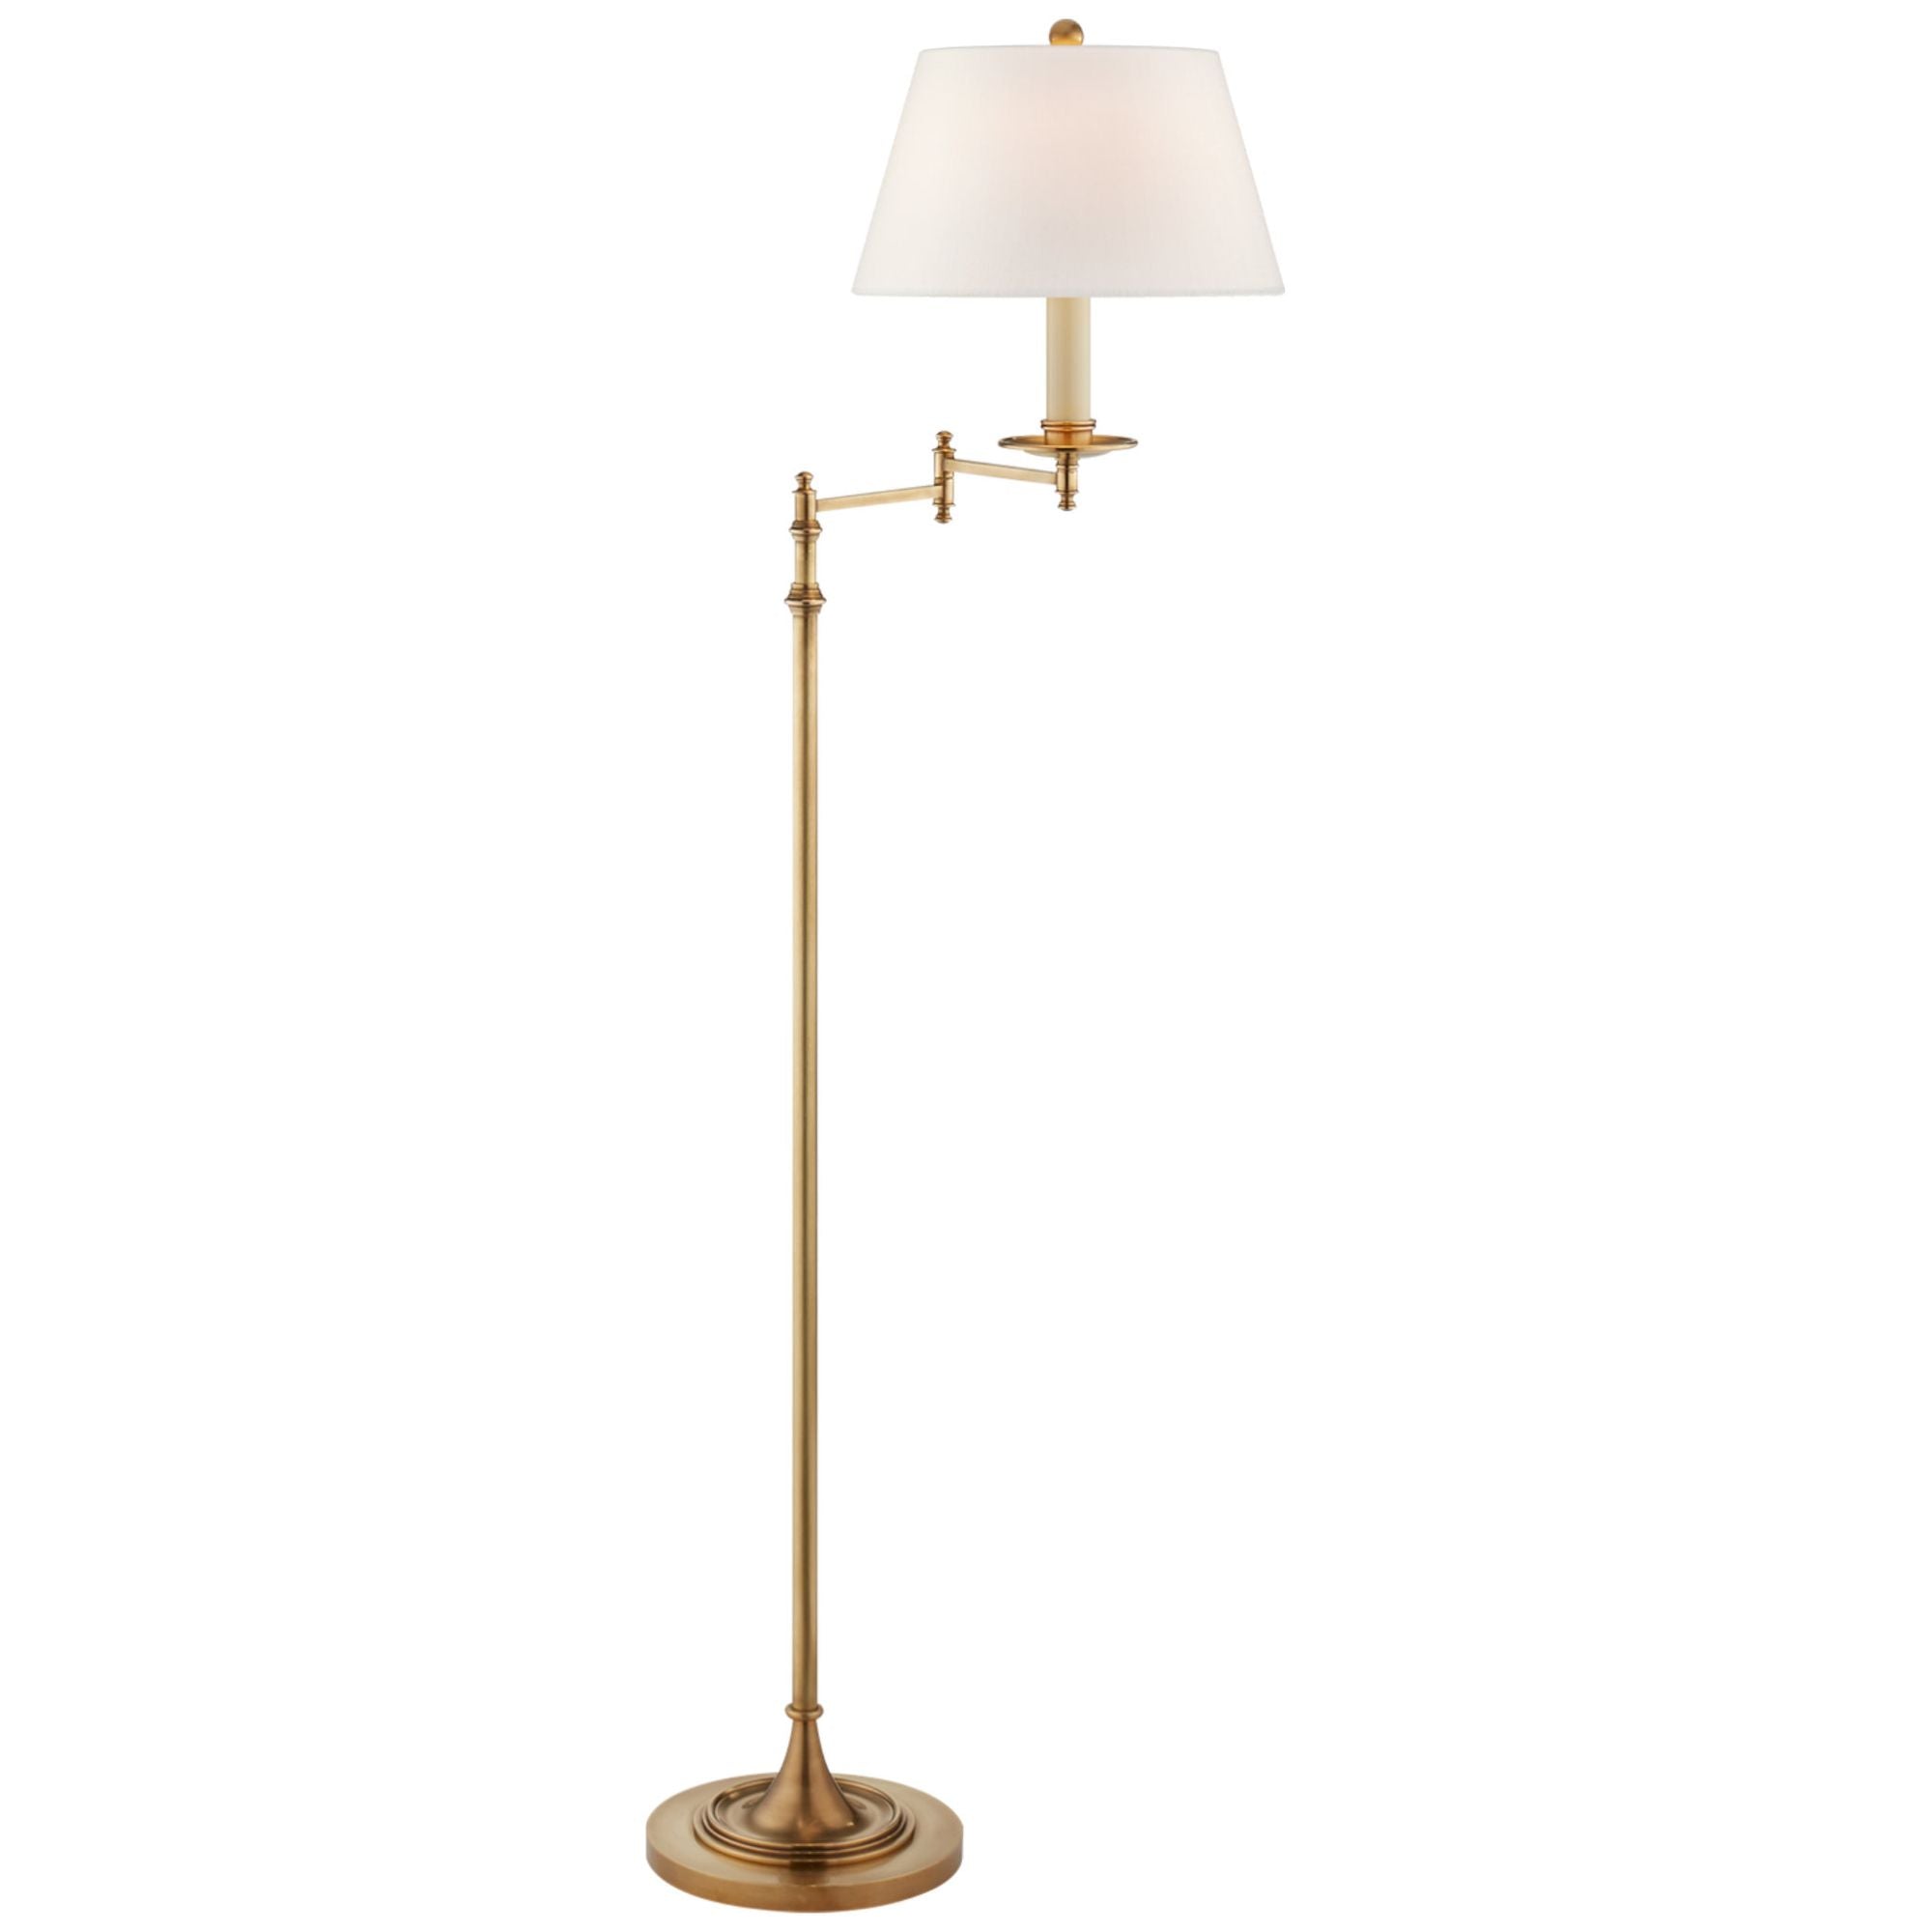 Chapman & Myers Dorchester 8 Picture Light in Antique-Burnished Brass